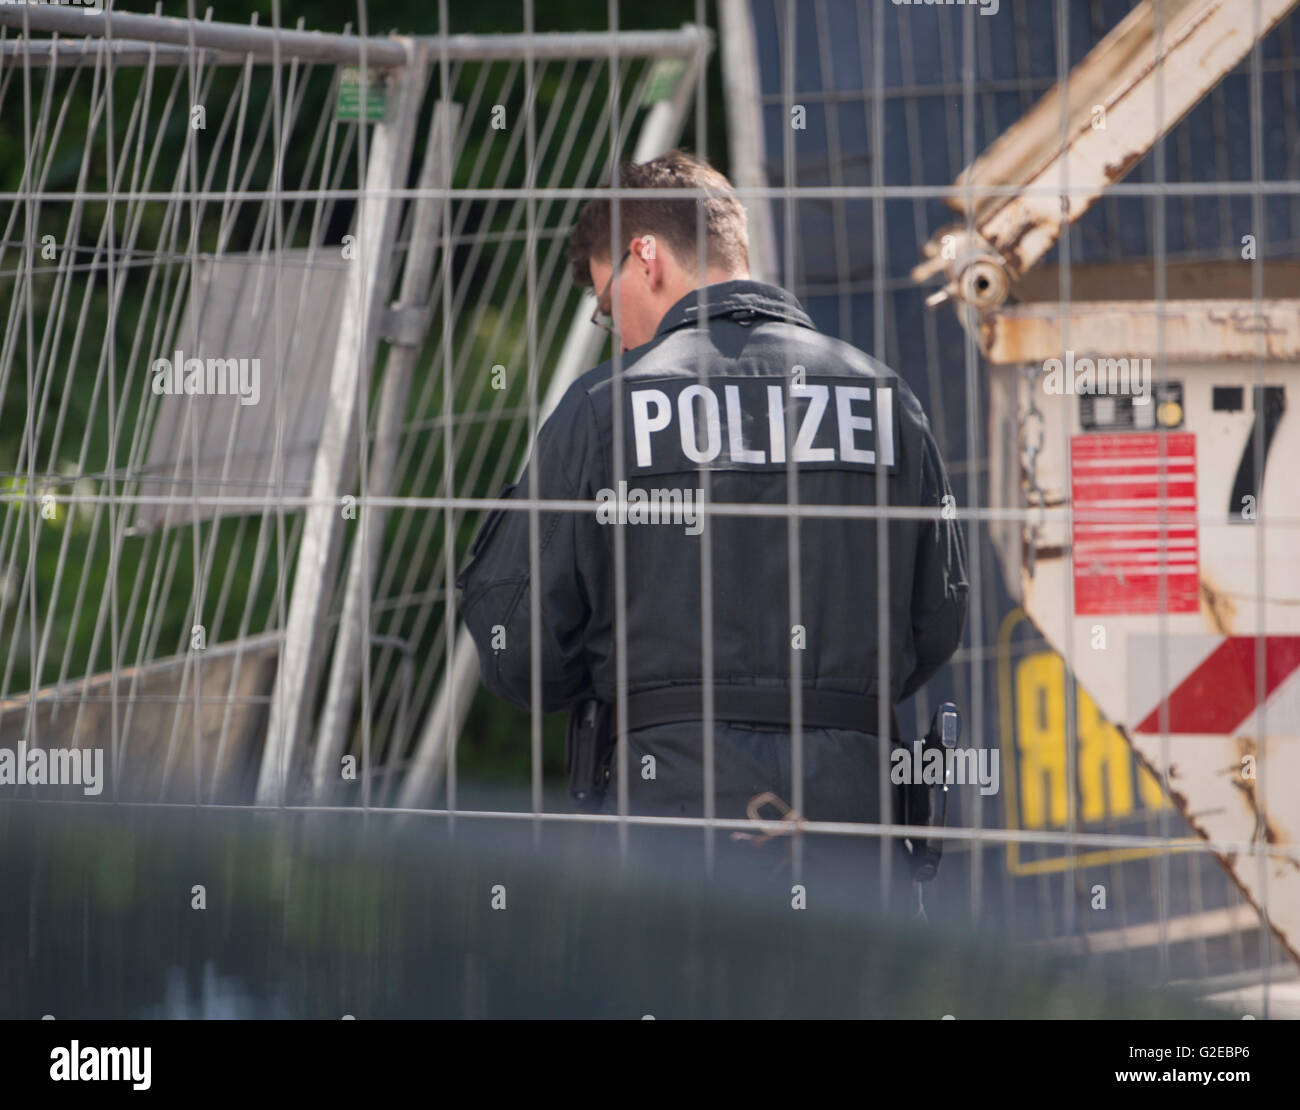 Berlin, Germany. 29th May, 2016. A policeman standing at a new building destroyed by an arson attack at Alte Jakobstrasse in Berlin, Germany, 29 May 2016. According to the police, unknown offenders lit cars on fire, destroyed windows and threw incendiary compositions on the new building. PHOTO: PAUL ZINKEN/dpa/Alamy Live News Stock Photo